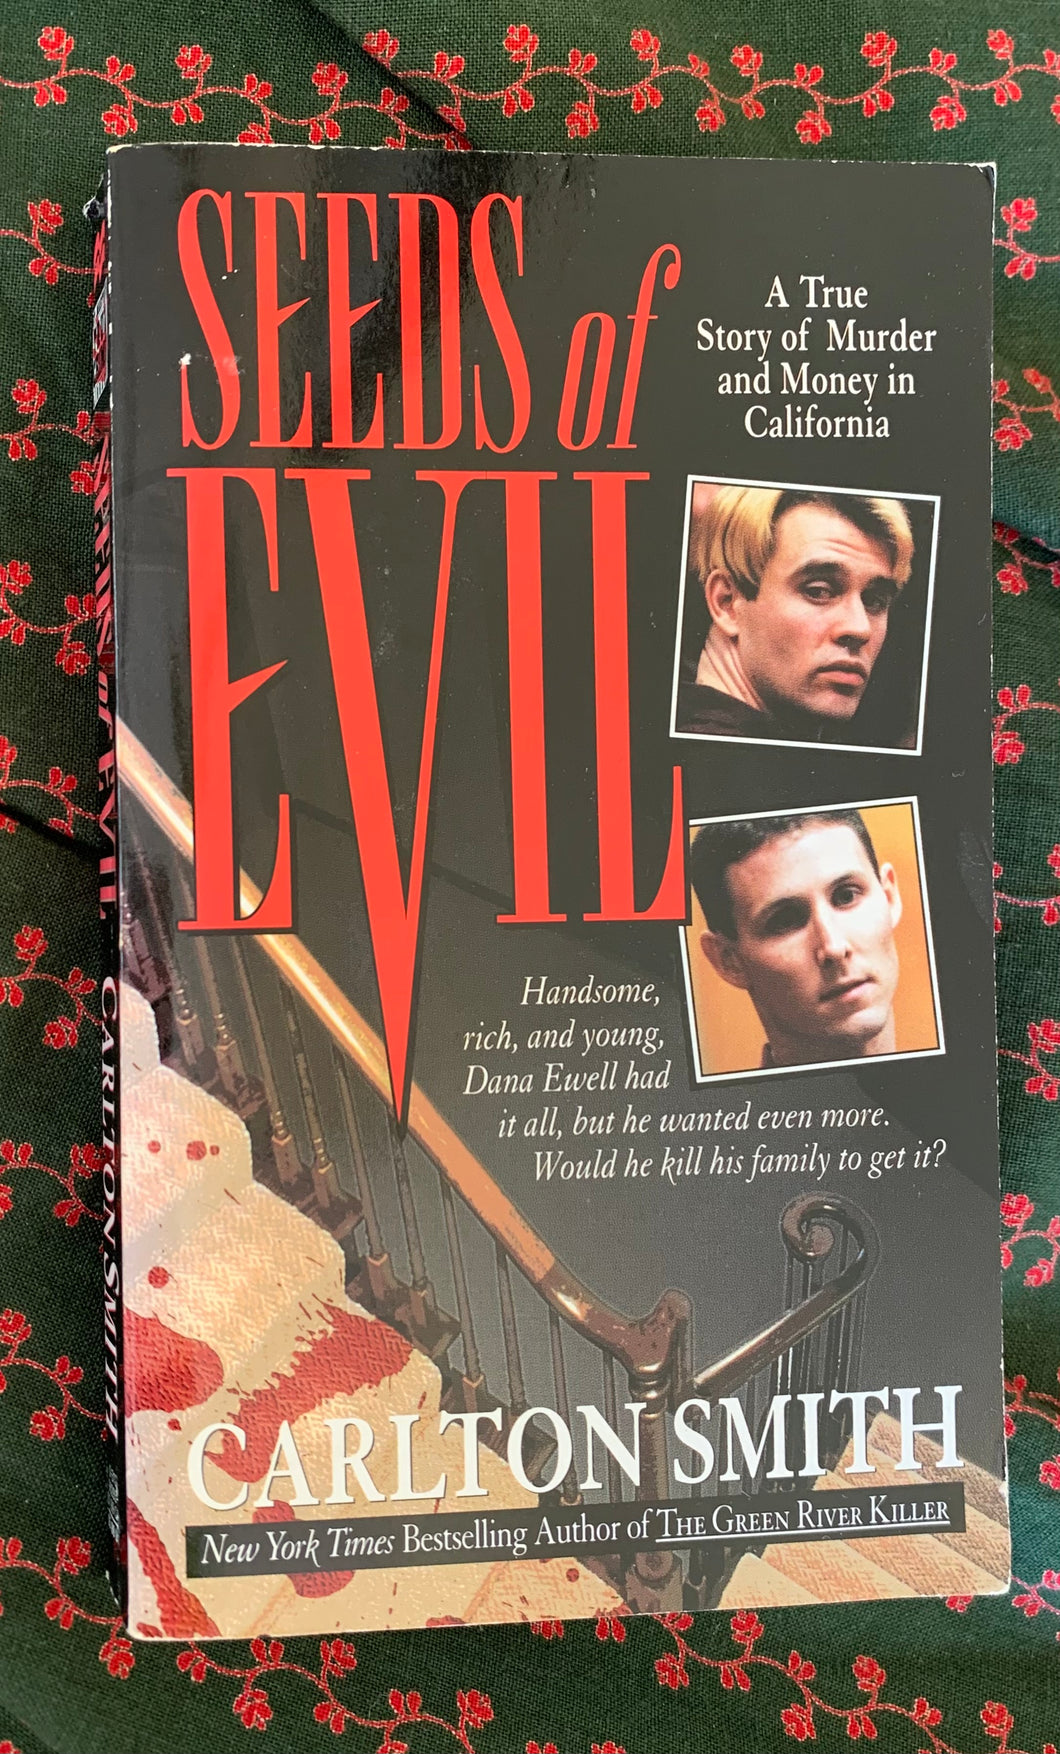 Seeds of Evil: A True Story of Murder and Money in California